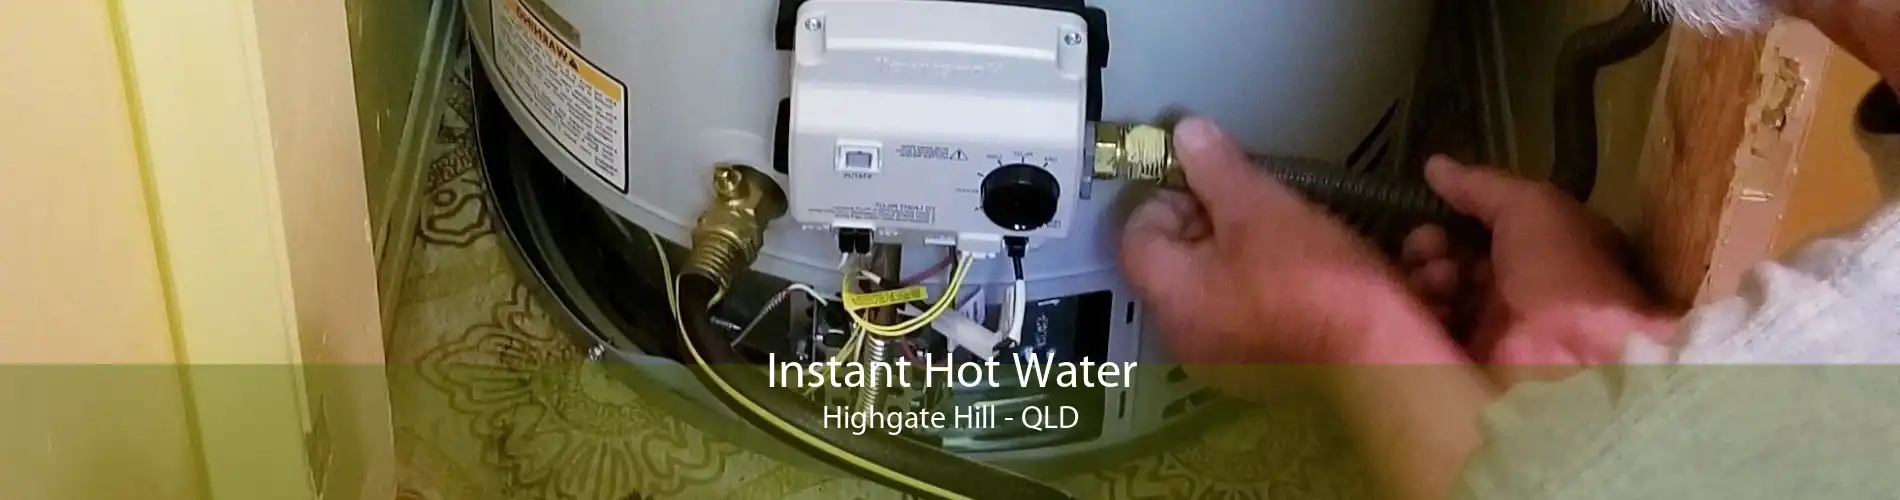 Instant Hot Water Highgate Hill - QLD